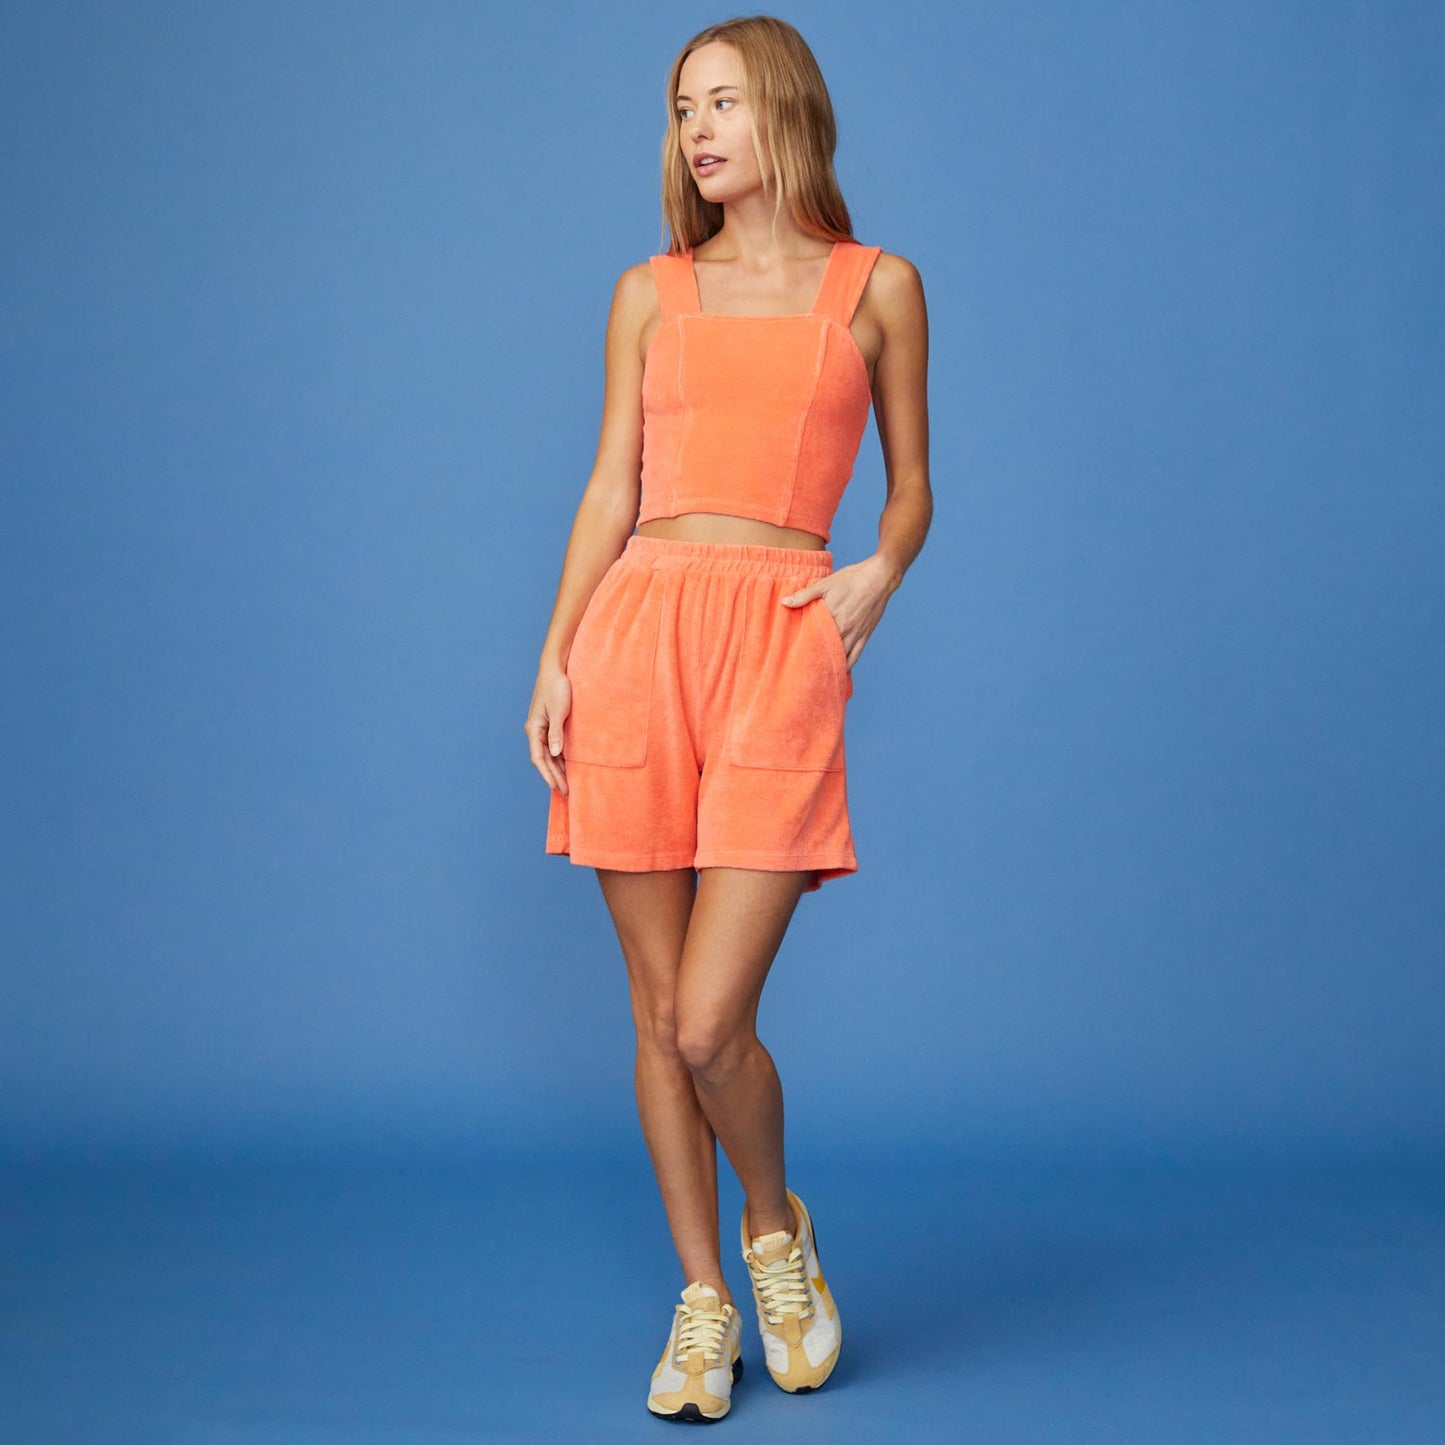 Full View of model wearing the Terry Cloth Cropped Tank in Georgia Peach